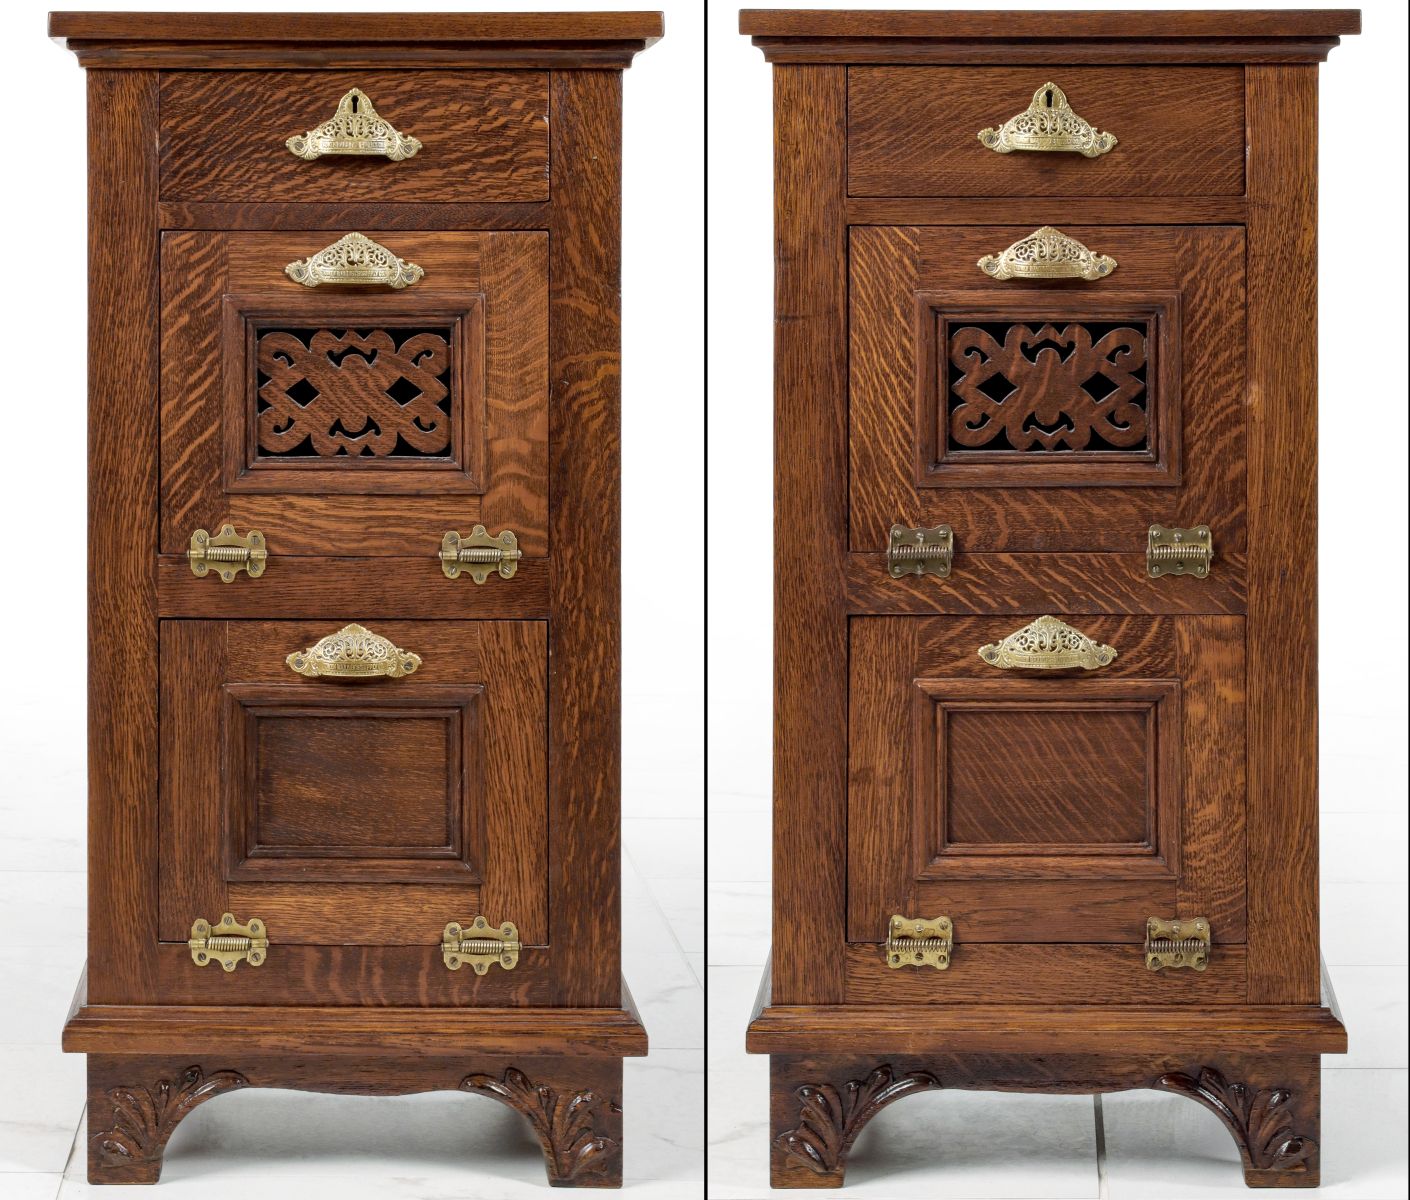 A PAIR OF RARE SMALL OAK BARBER SHOP CABINETS BY KOKEN